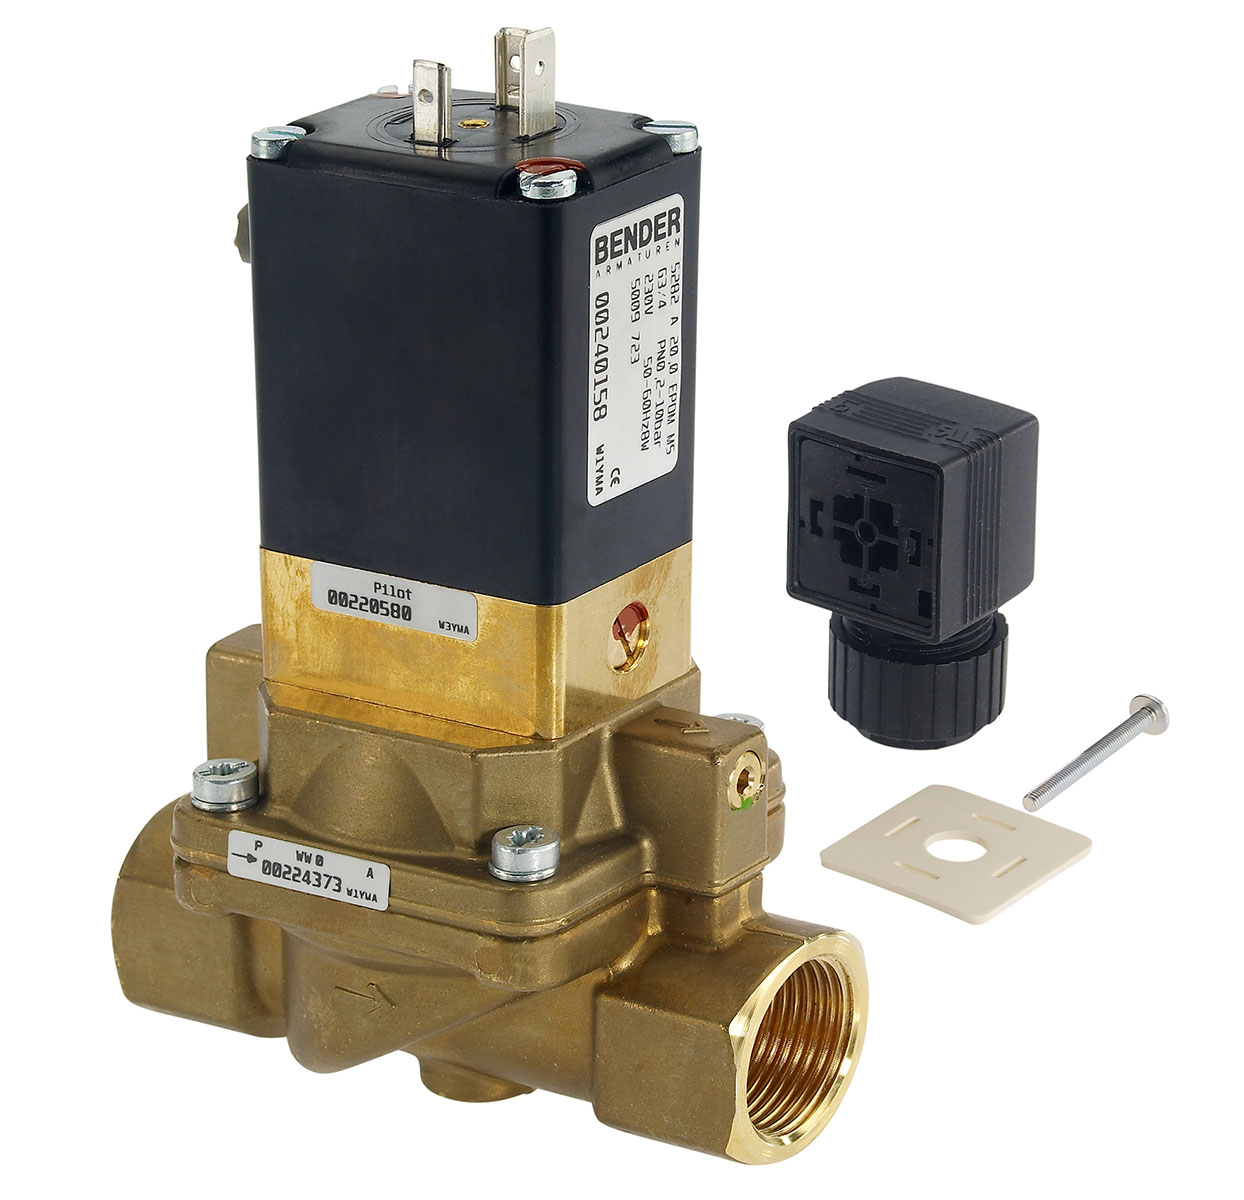 5009704 - 2/2 way solenoid valve normally closed for lightly soiled fluids Type 7; female thread